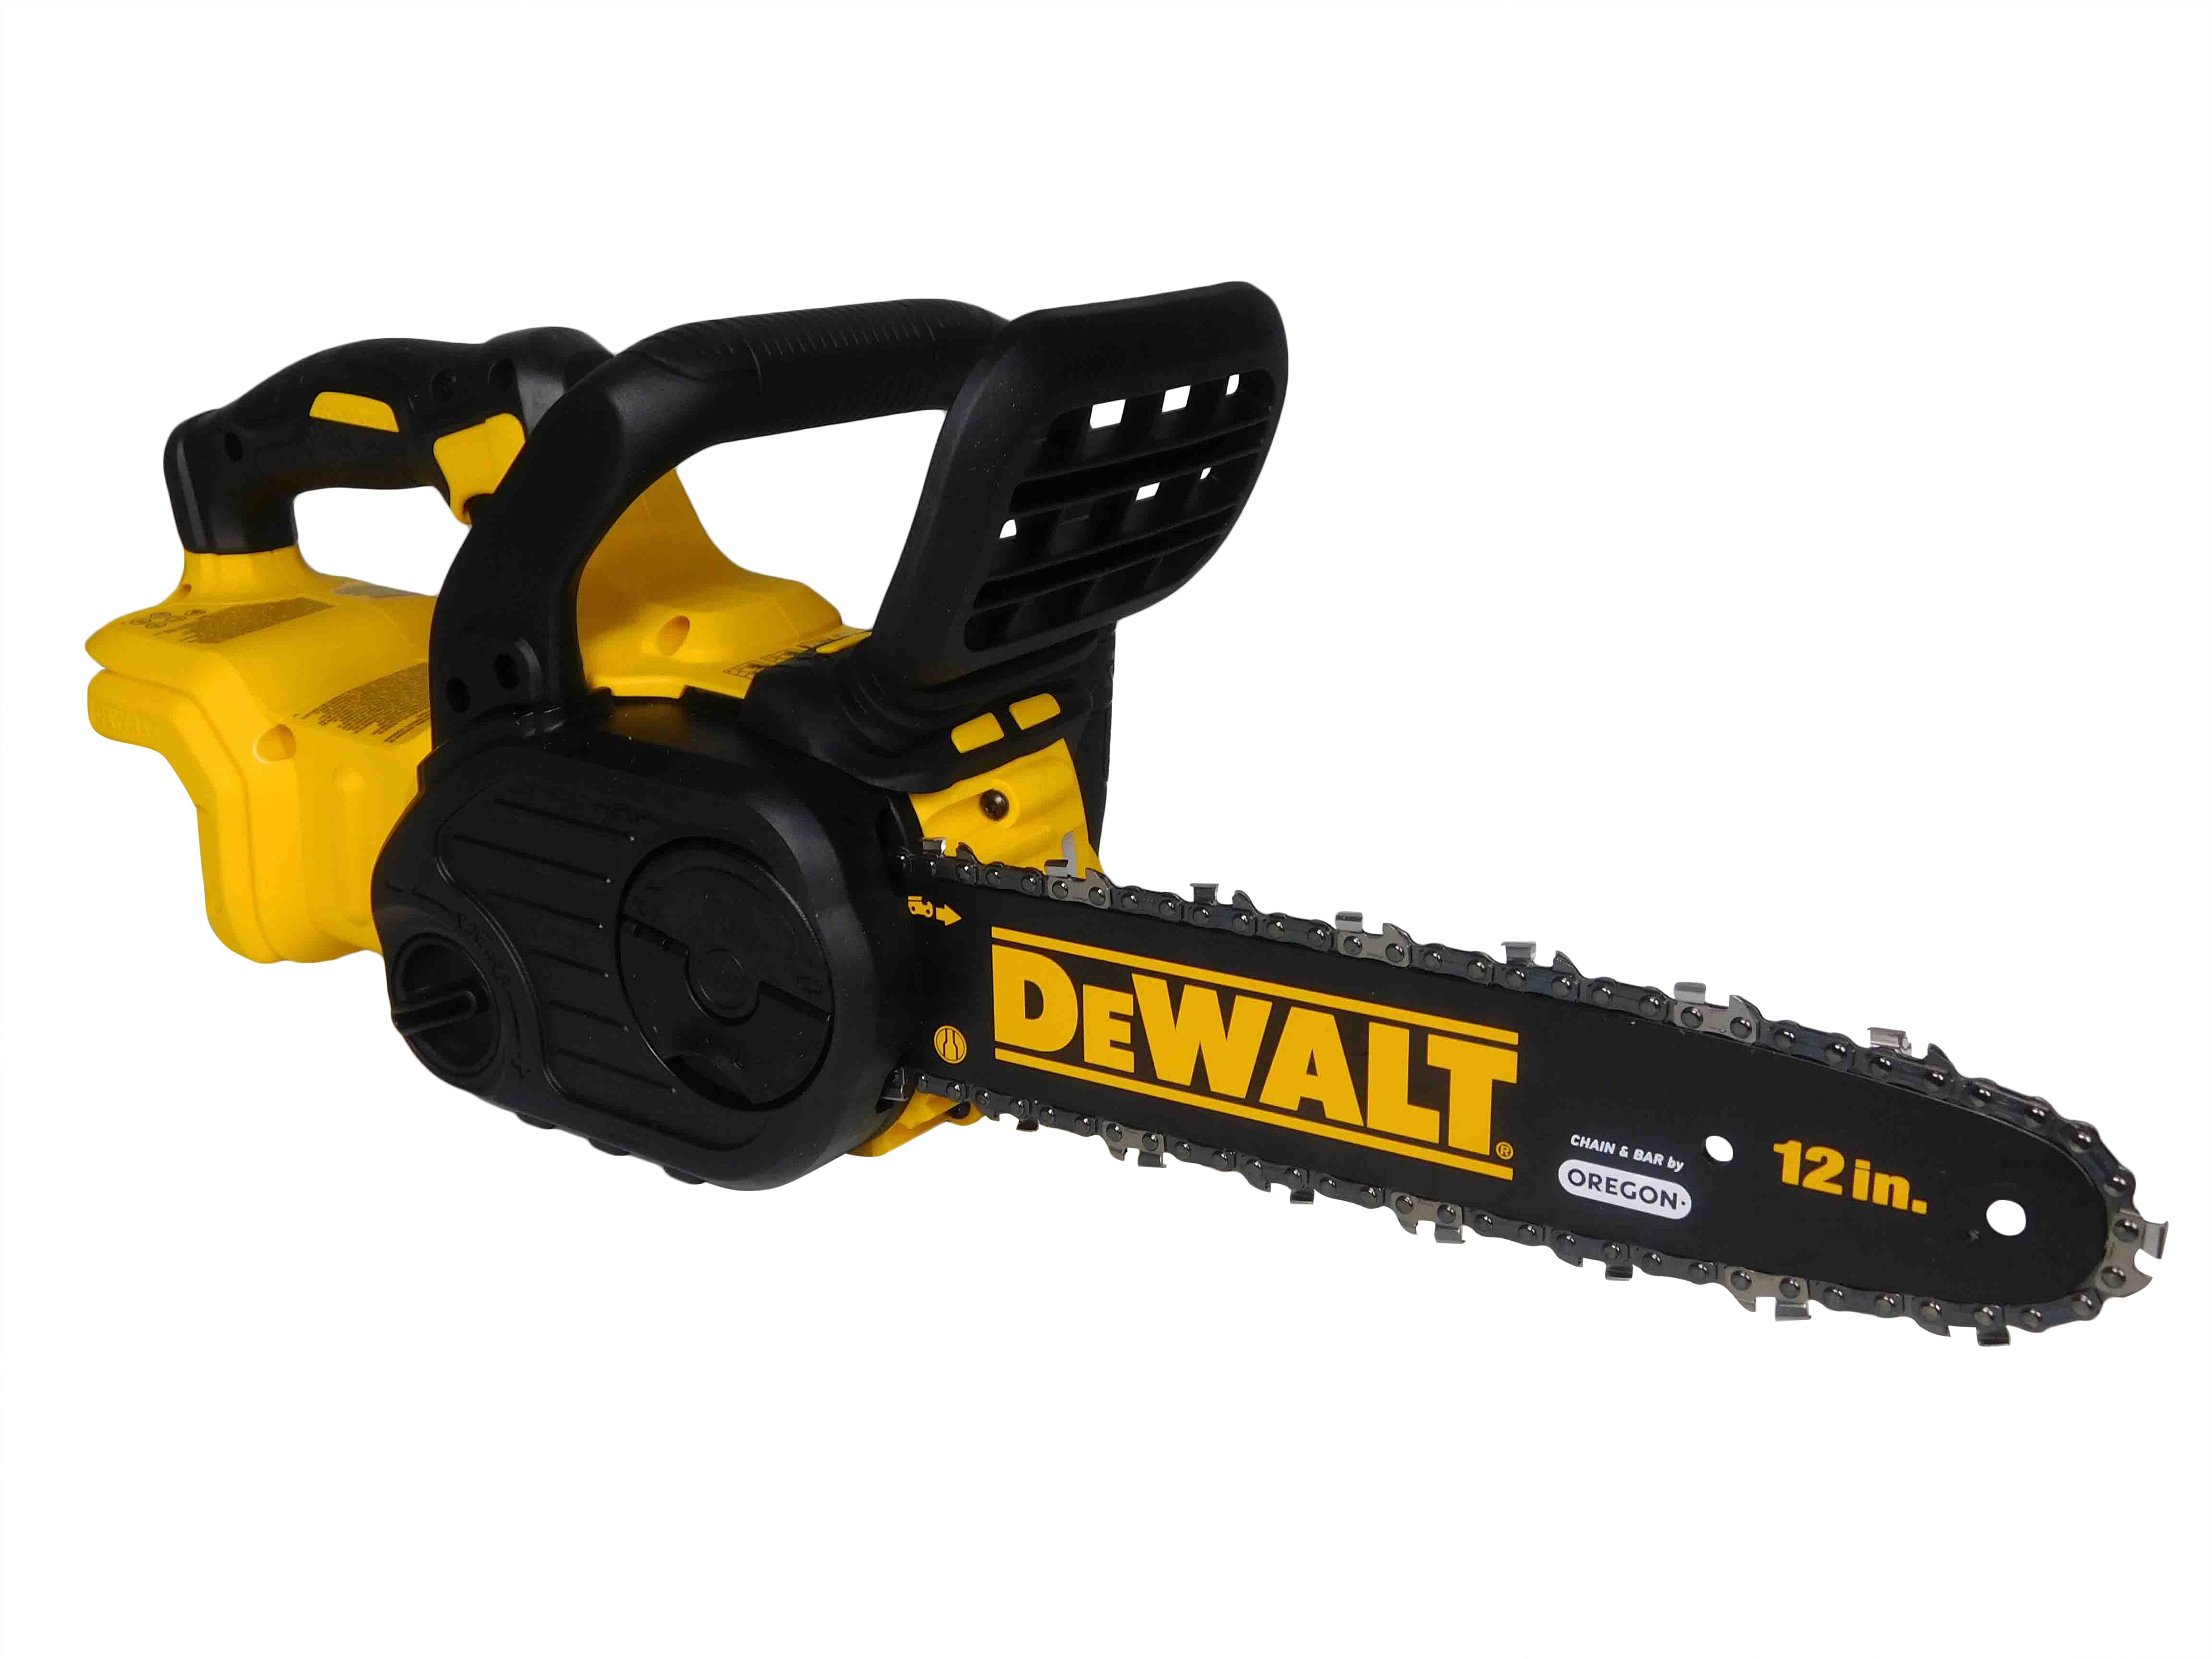 DEWALT DCCS620B 20V Max Compact Cordless Chainsaw Bare Tool w Brushless Motor